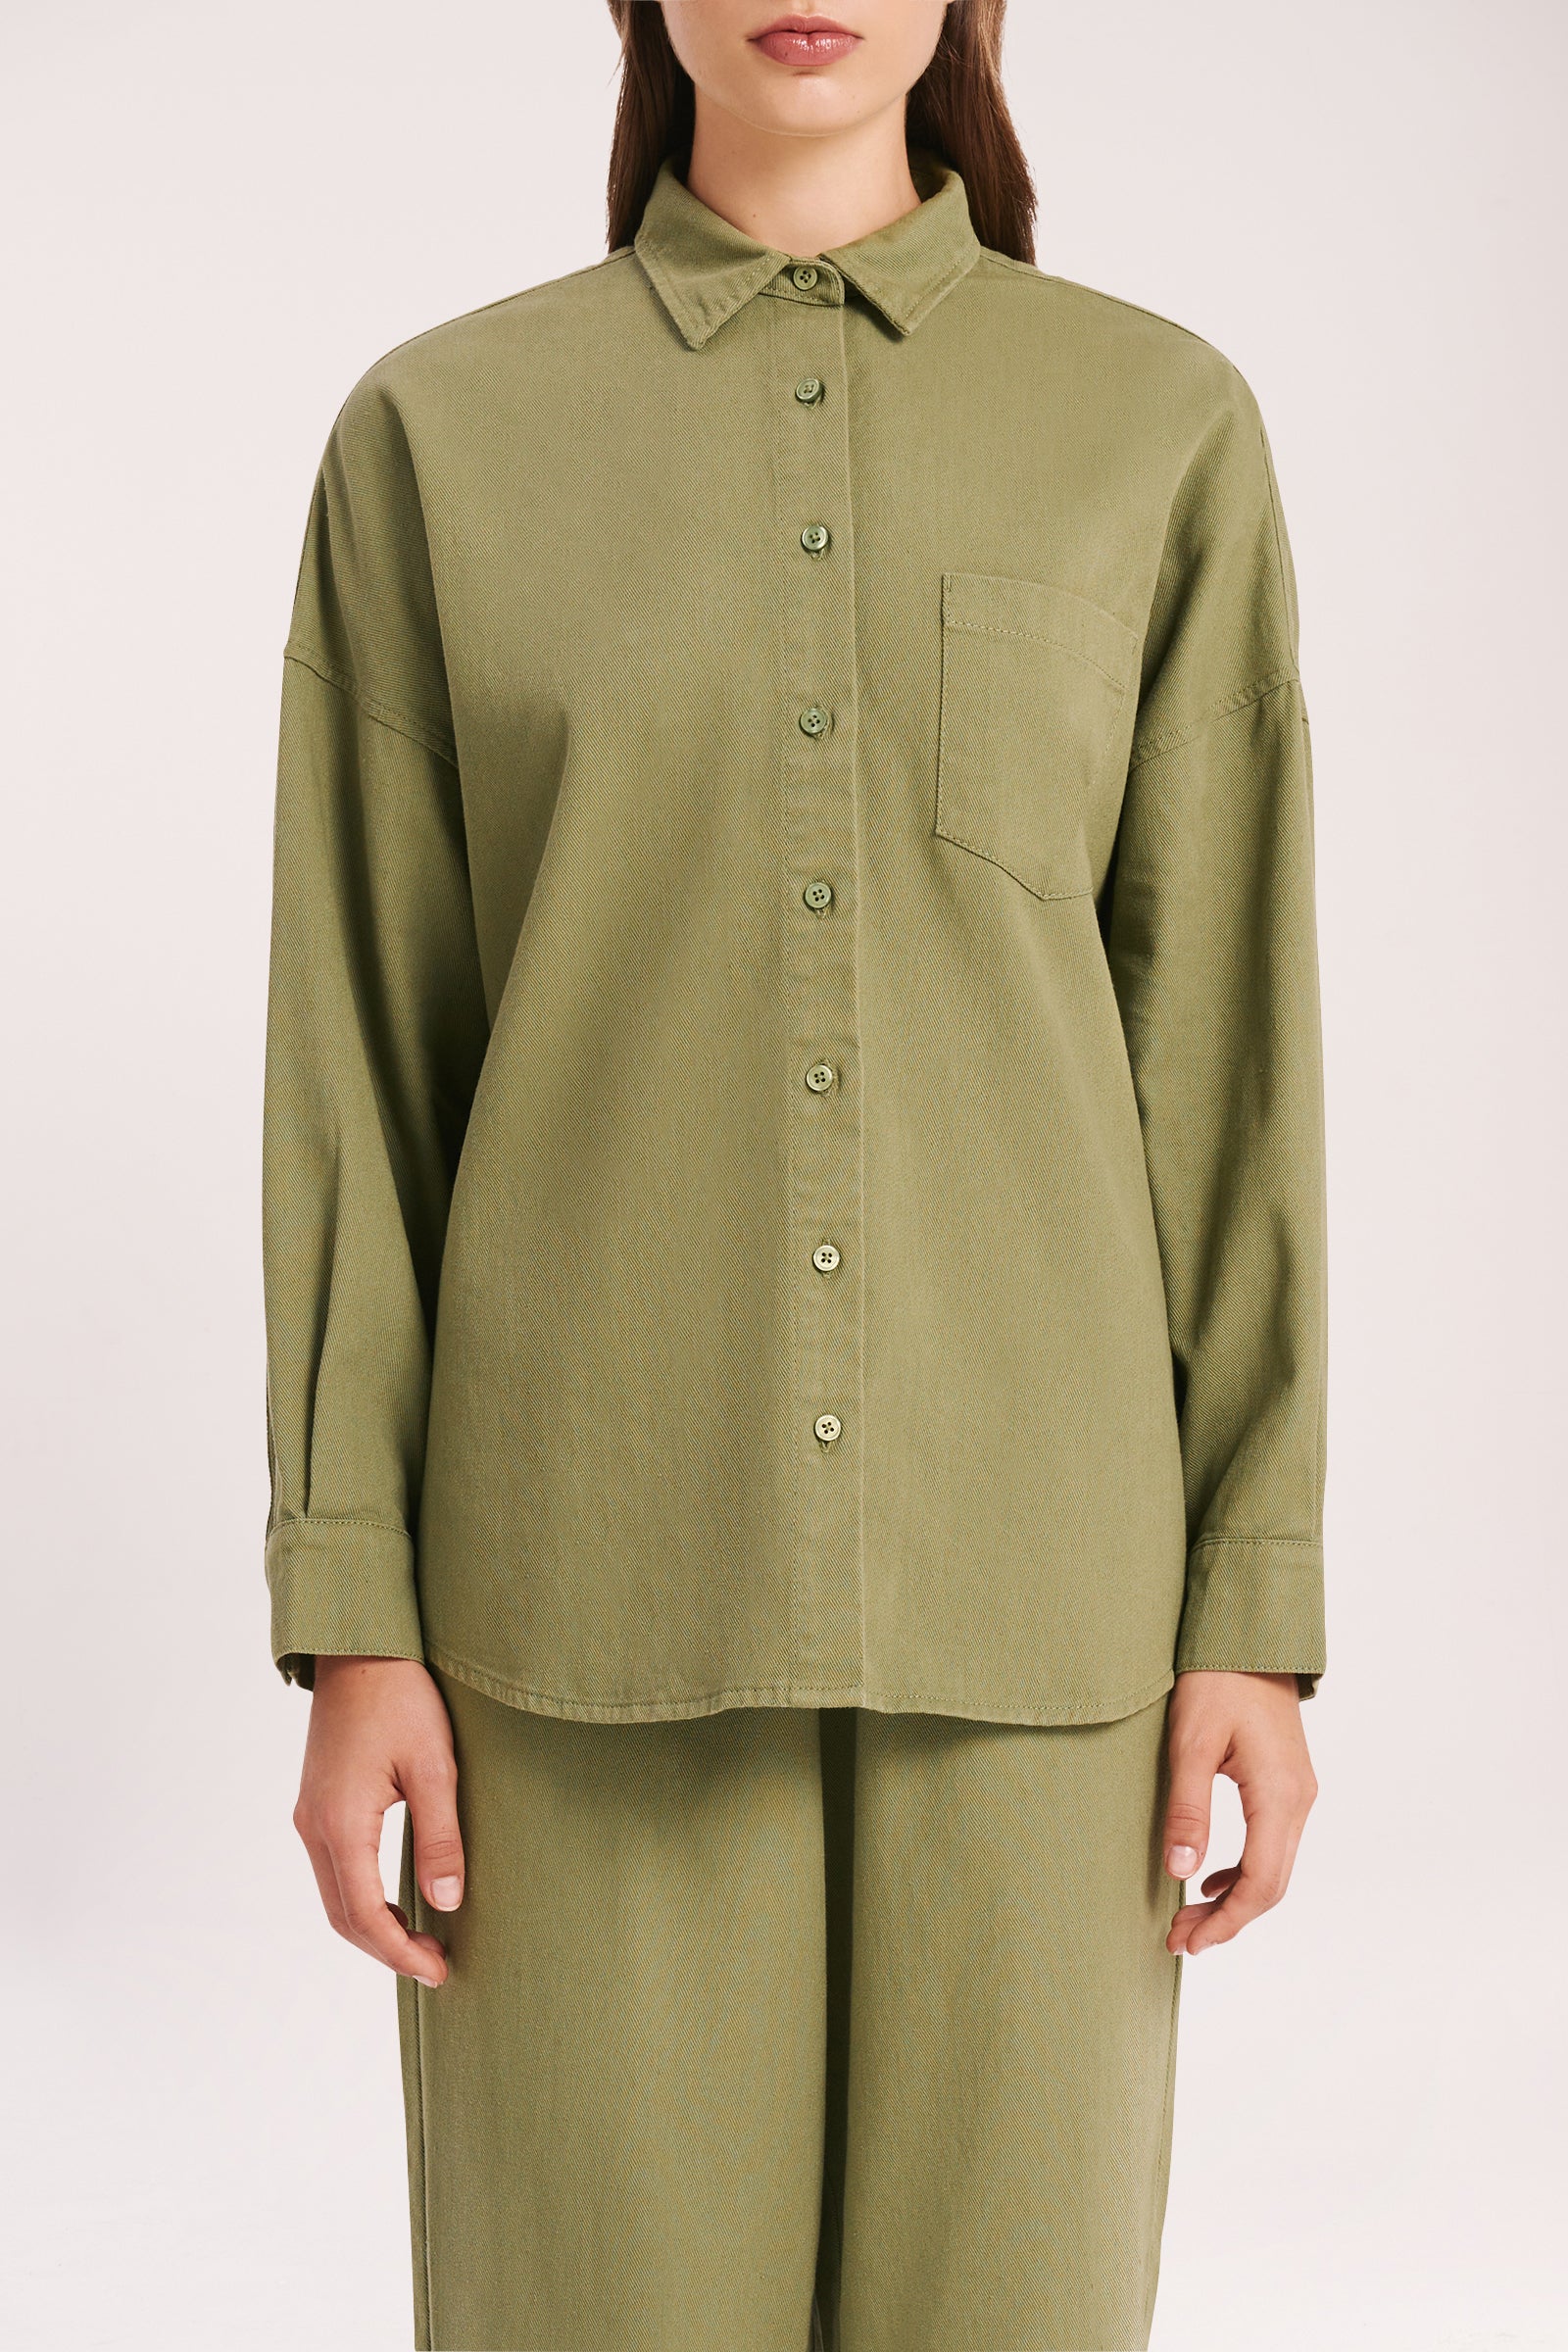 Nude Lucy Brookes Shirt In a Sage Green Colour 